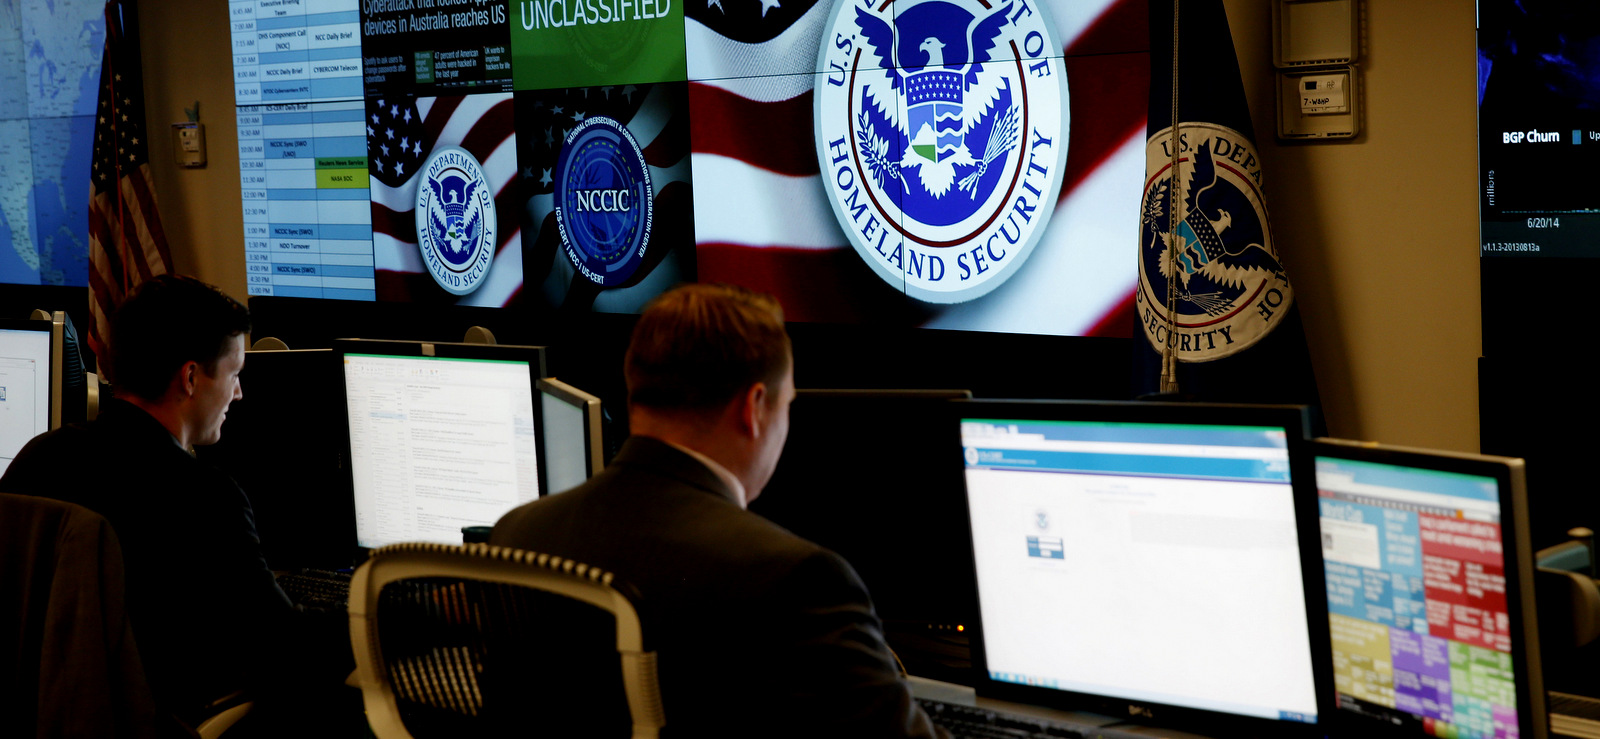 Employees work inside of the National Cybersecurity and Communications Integration Center during a media tour in Arlington, Virginia June 26, 2014. (Reuters/Kevin Lamarque)